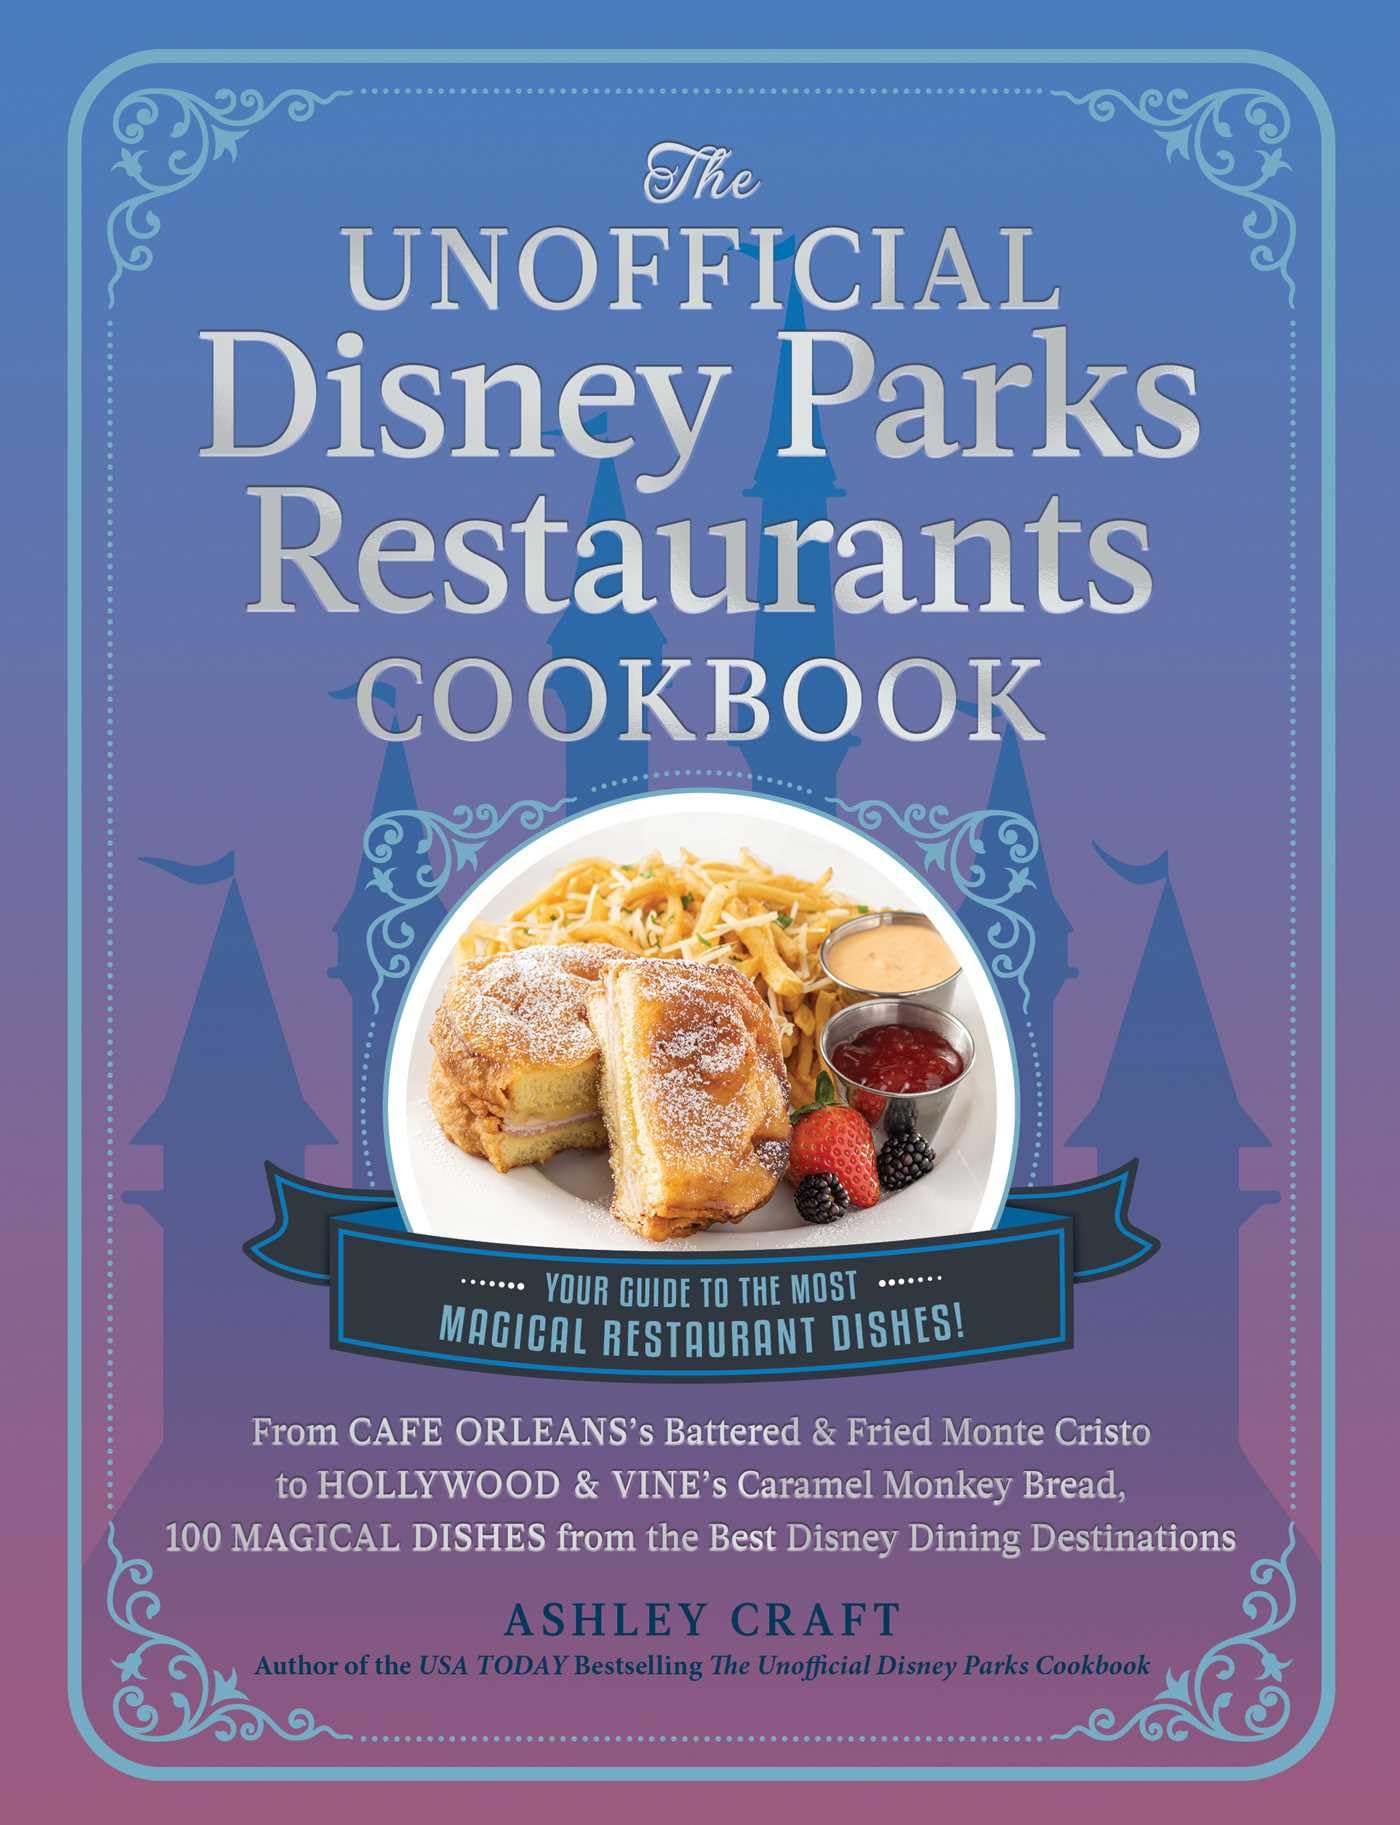 The Unofficial Disney Parks Restaurants Cookbook: From Cafe Orleans's Battered & Fried Monte Cristo to Hollywood & Vine's Caramel Monkey Bread, 100 ... Dining Destinations (Unofficial Cookbook)